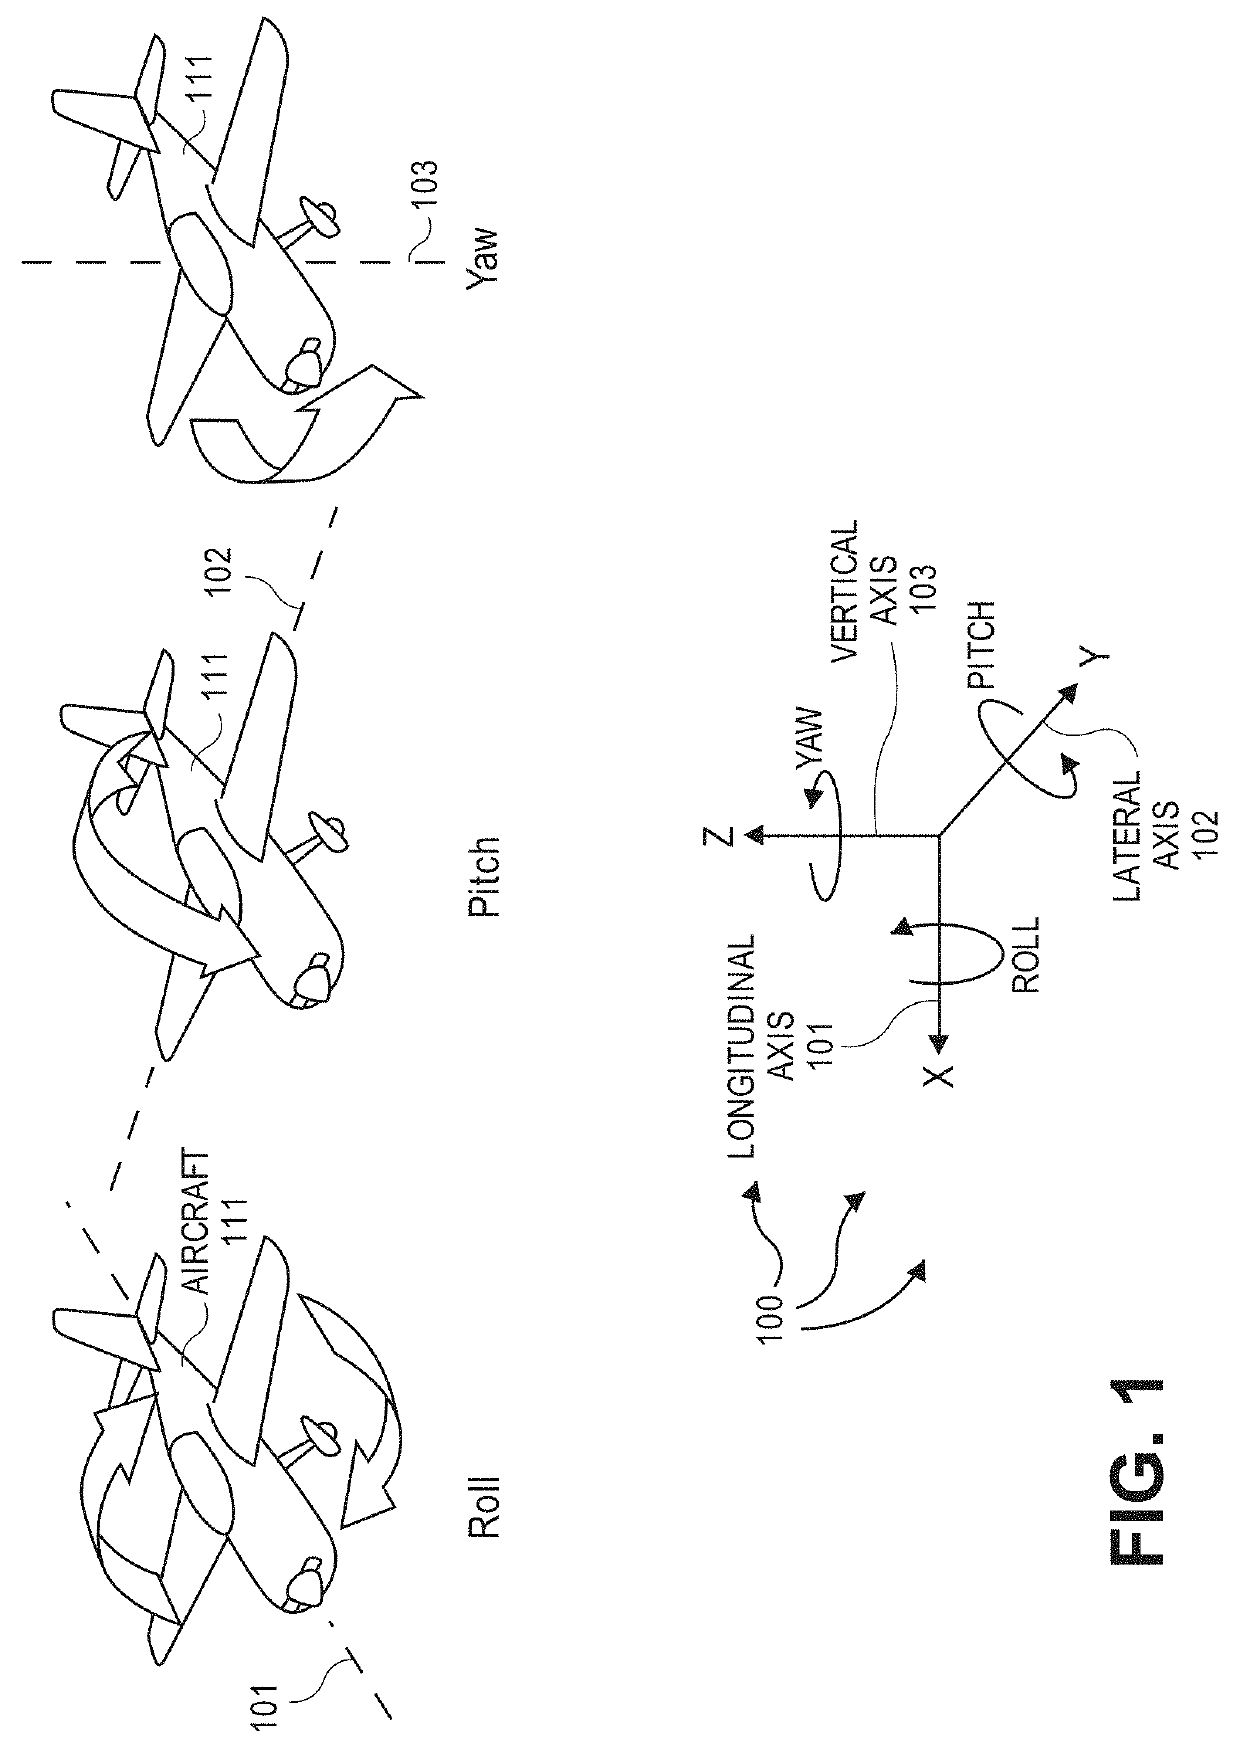 Remotely operated aerial vehicle with reduced cross-section area during forward flight